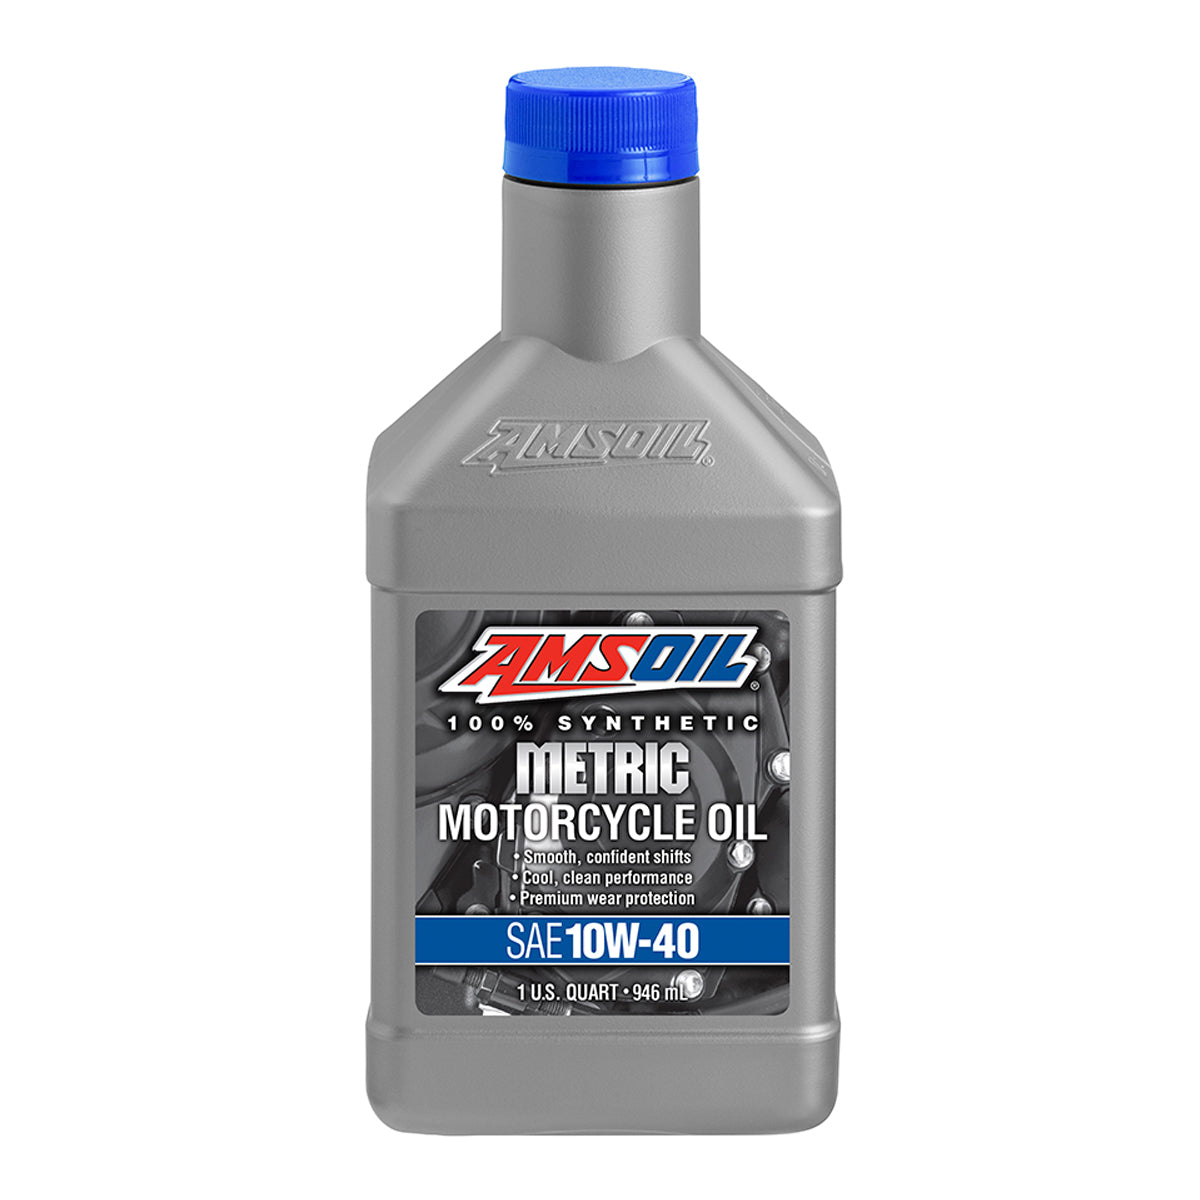 XAO MCFQT | 10W40 SYNTHETIC METRIC MOTORCYCLE OIL  | 1 US QT